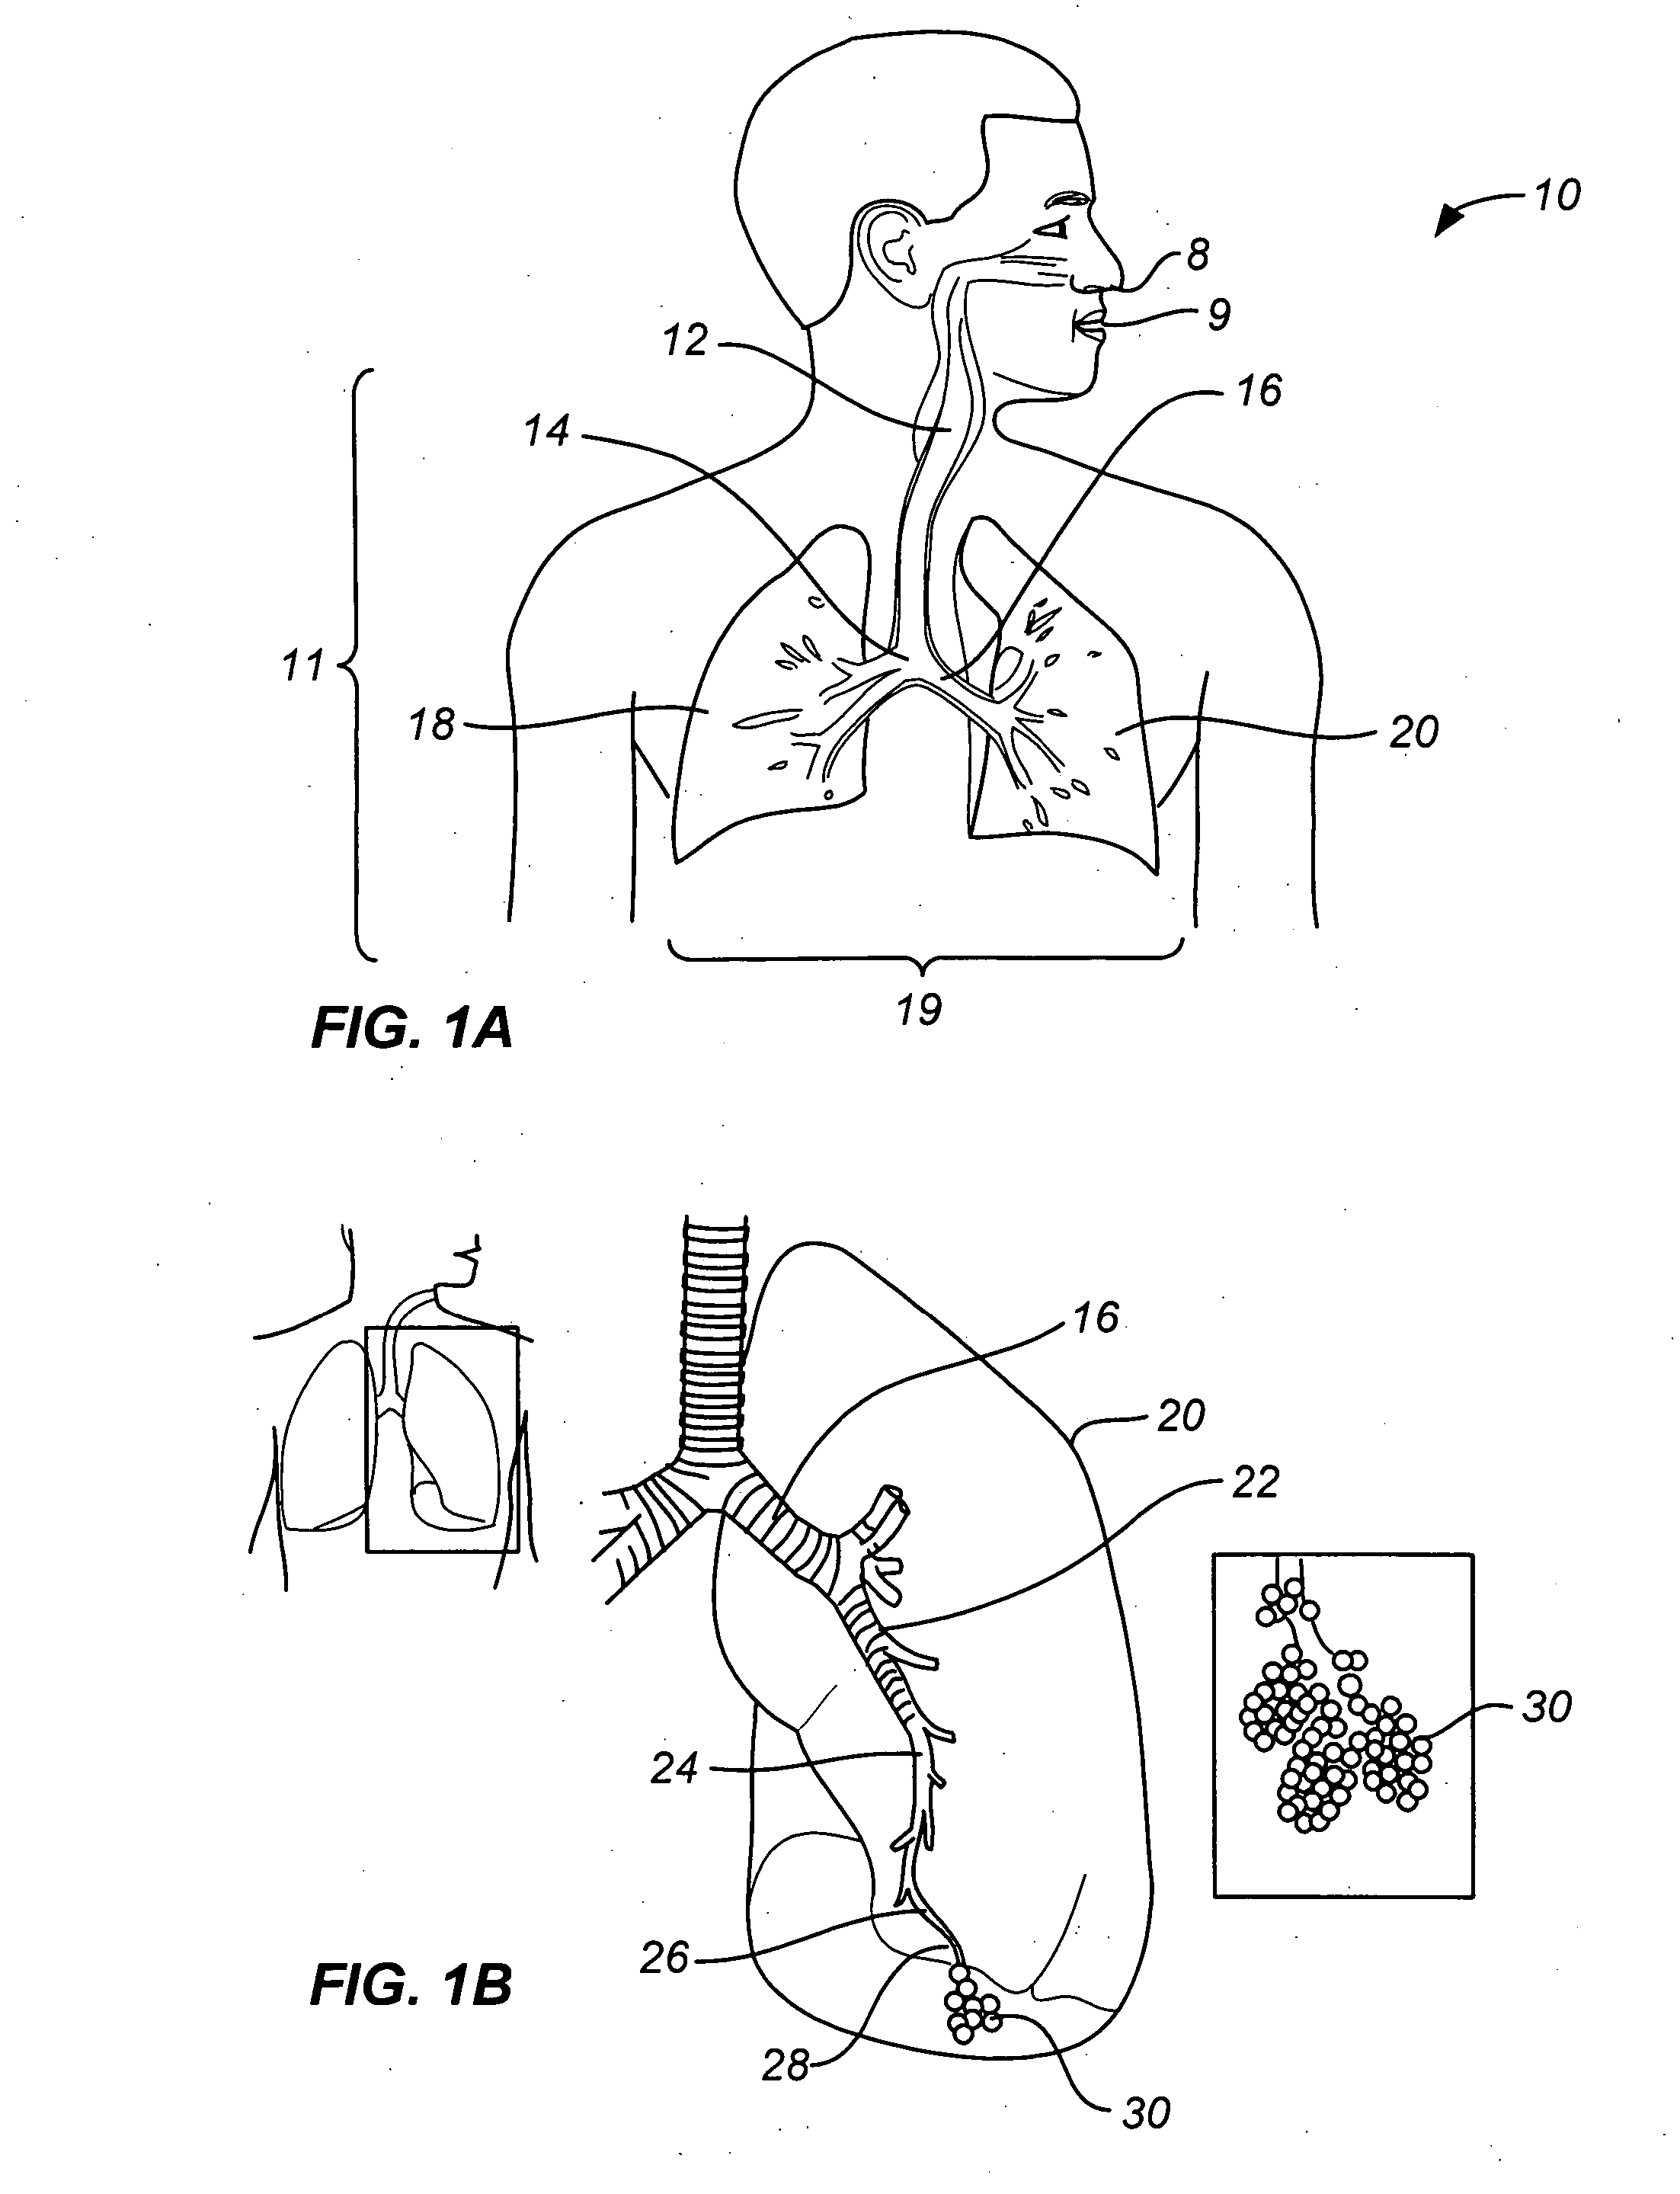 Steerable device for accessing a target site and methods